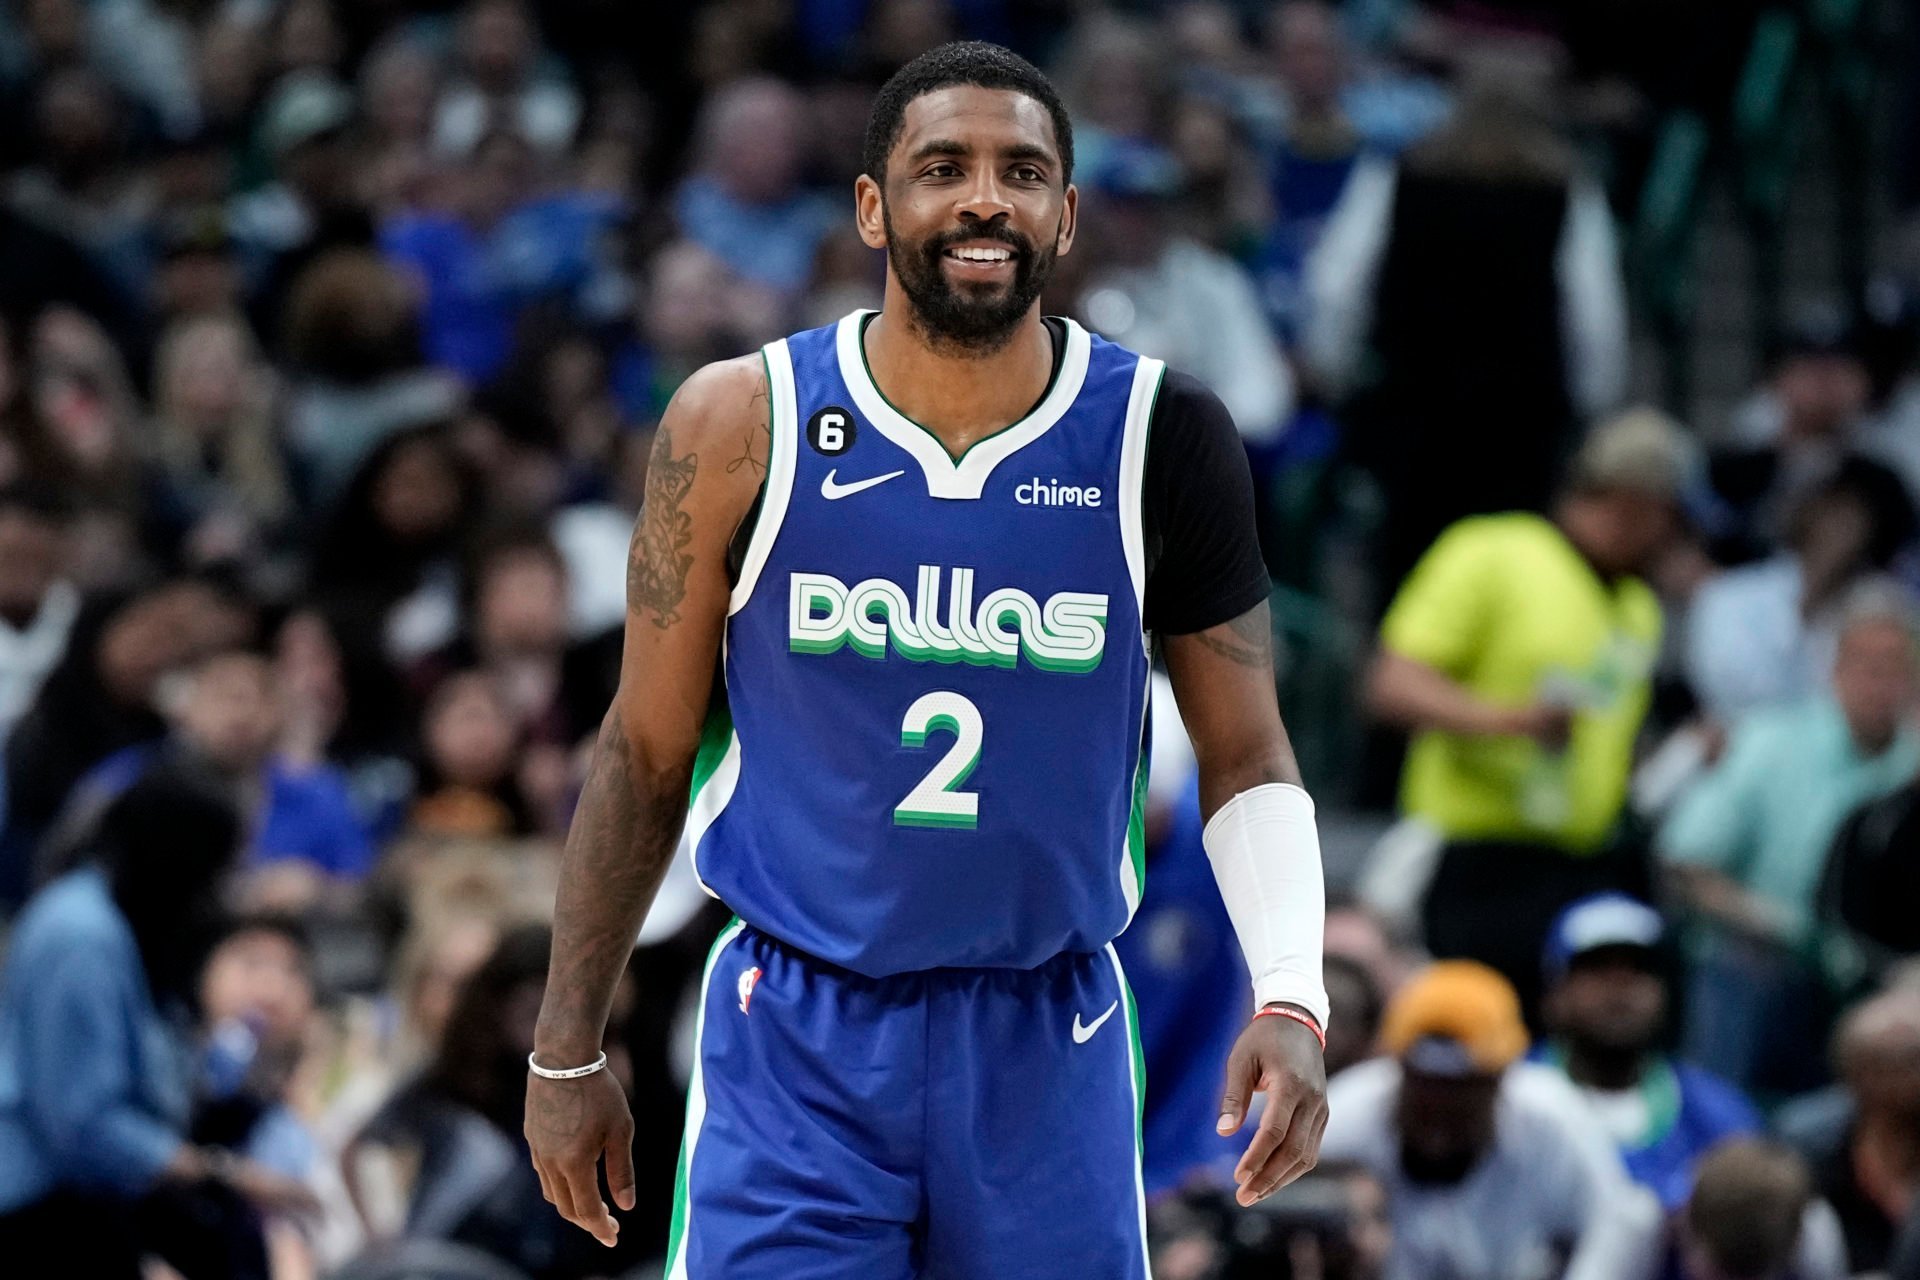 Kyrie Irving shaved his beard off and fans can't get over how old he looks